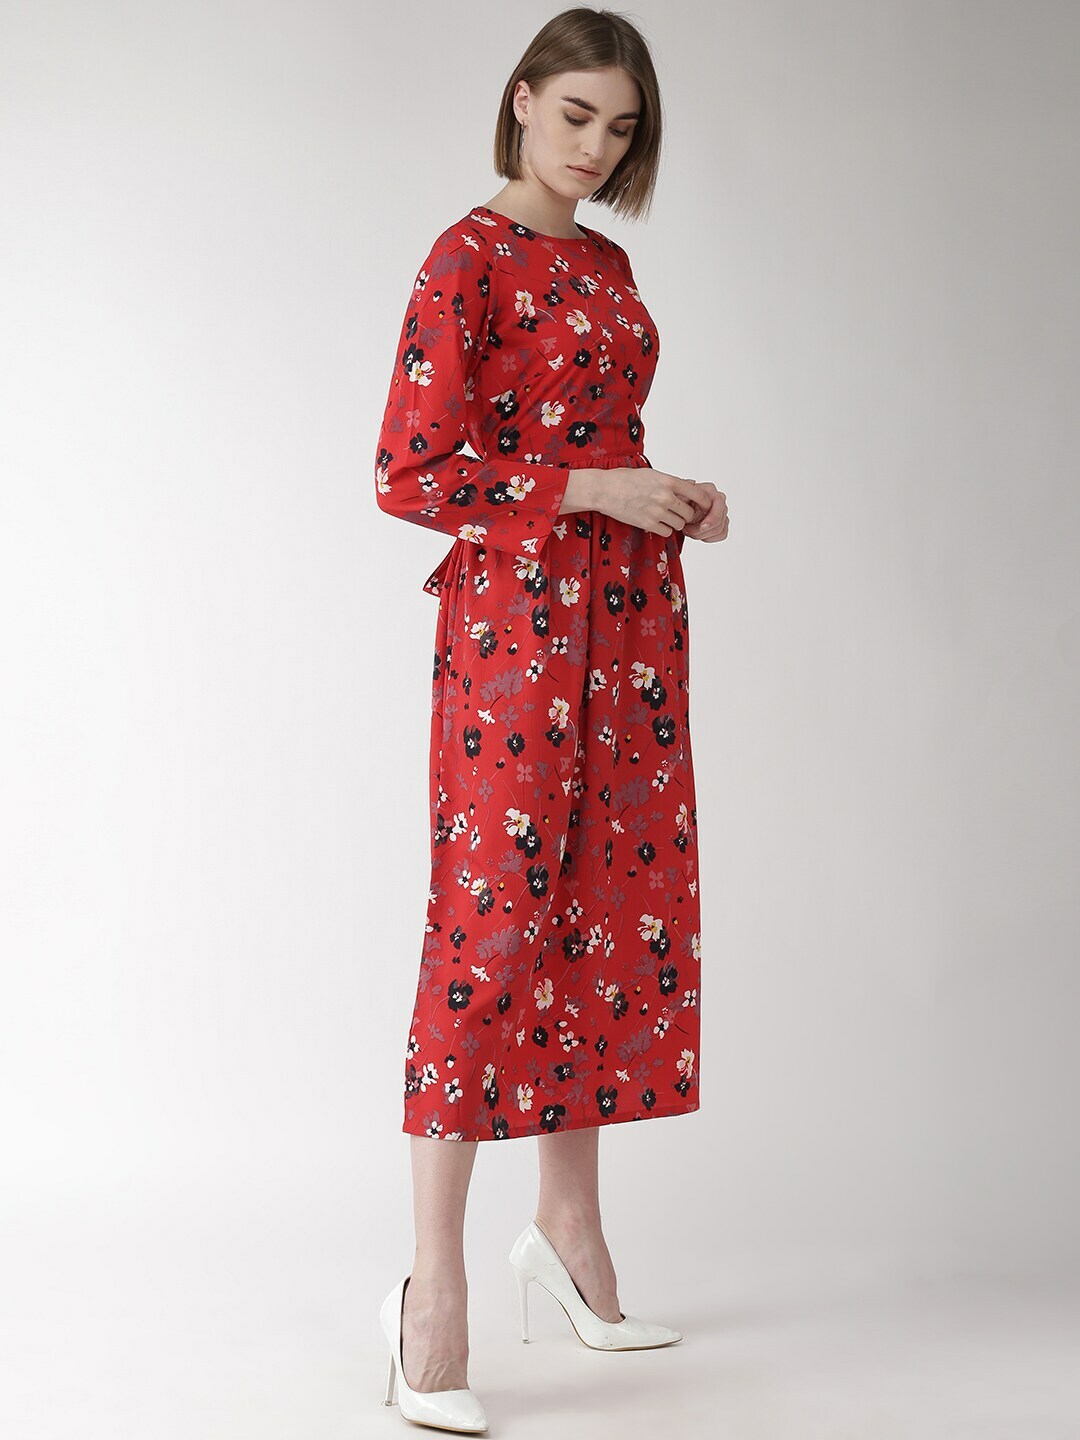 plusS Women Red Floral Print Fit and Flare Dress